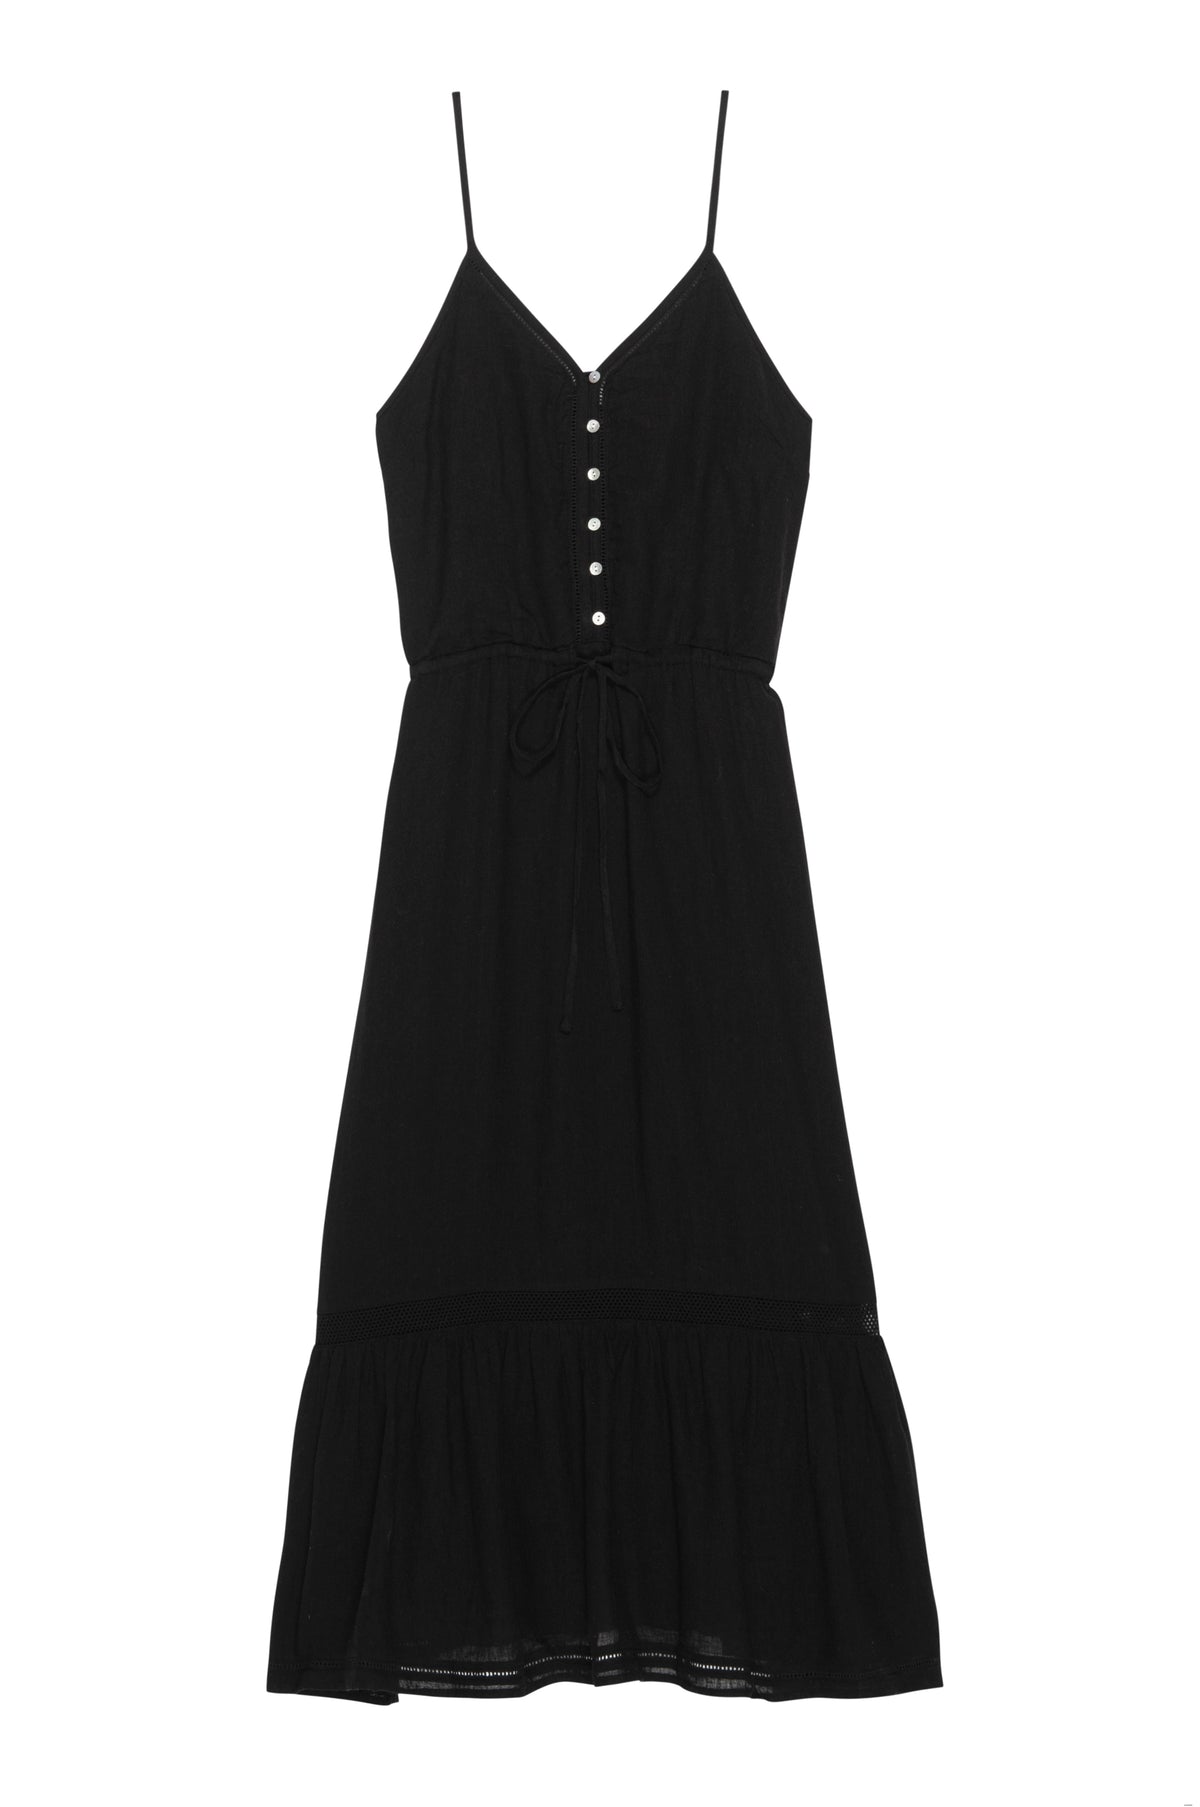 Black linen blend button through dress with spaghetti straps and shaped hem